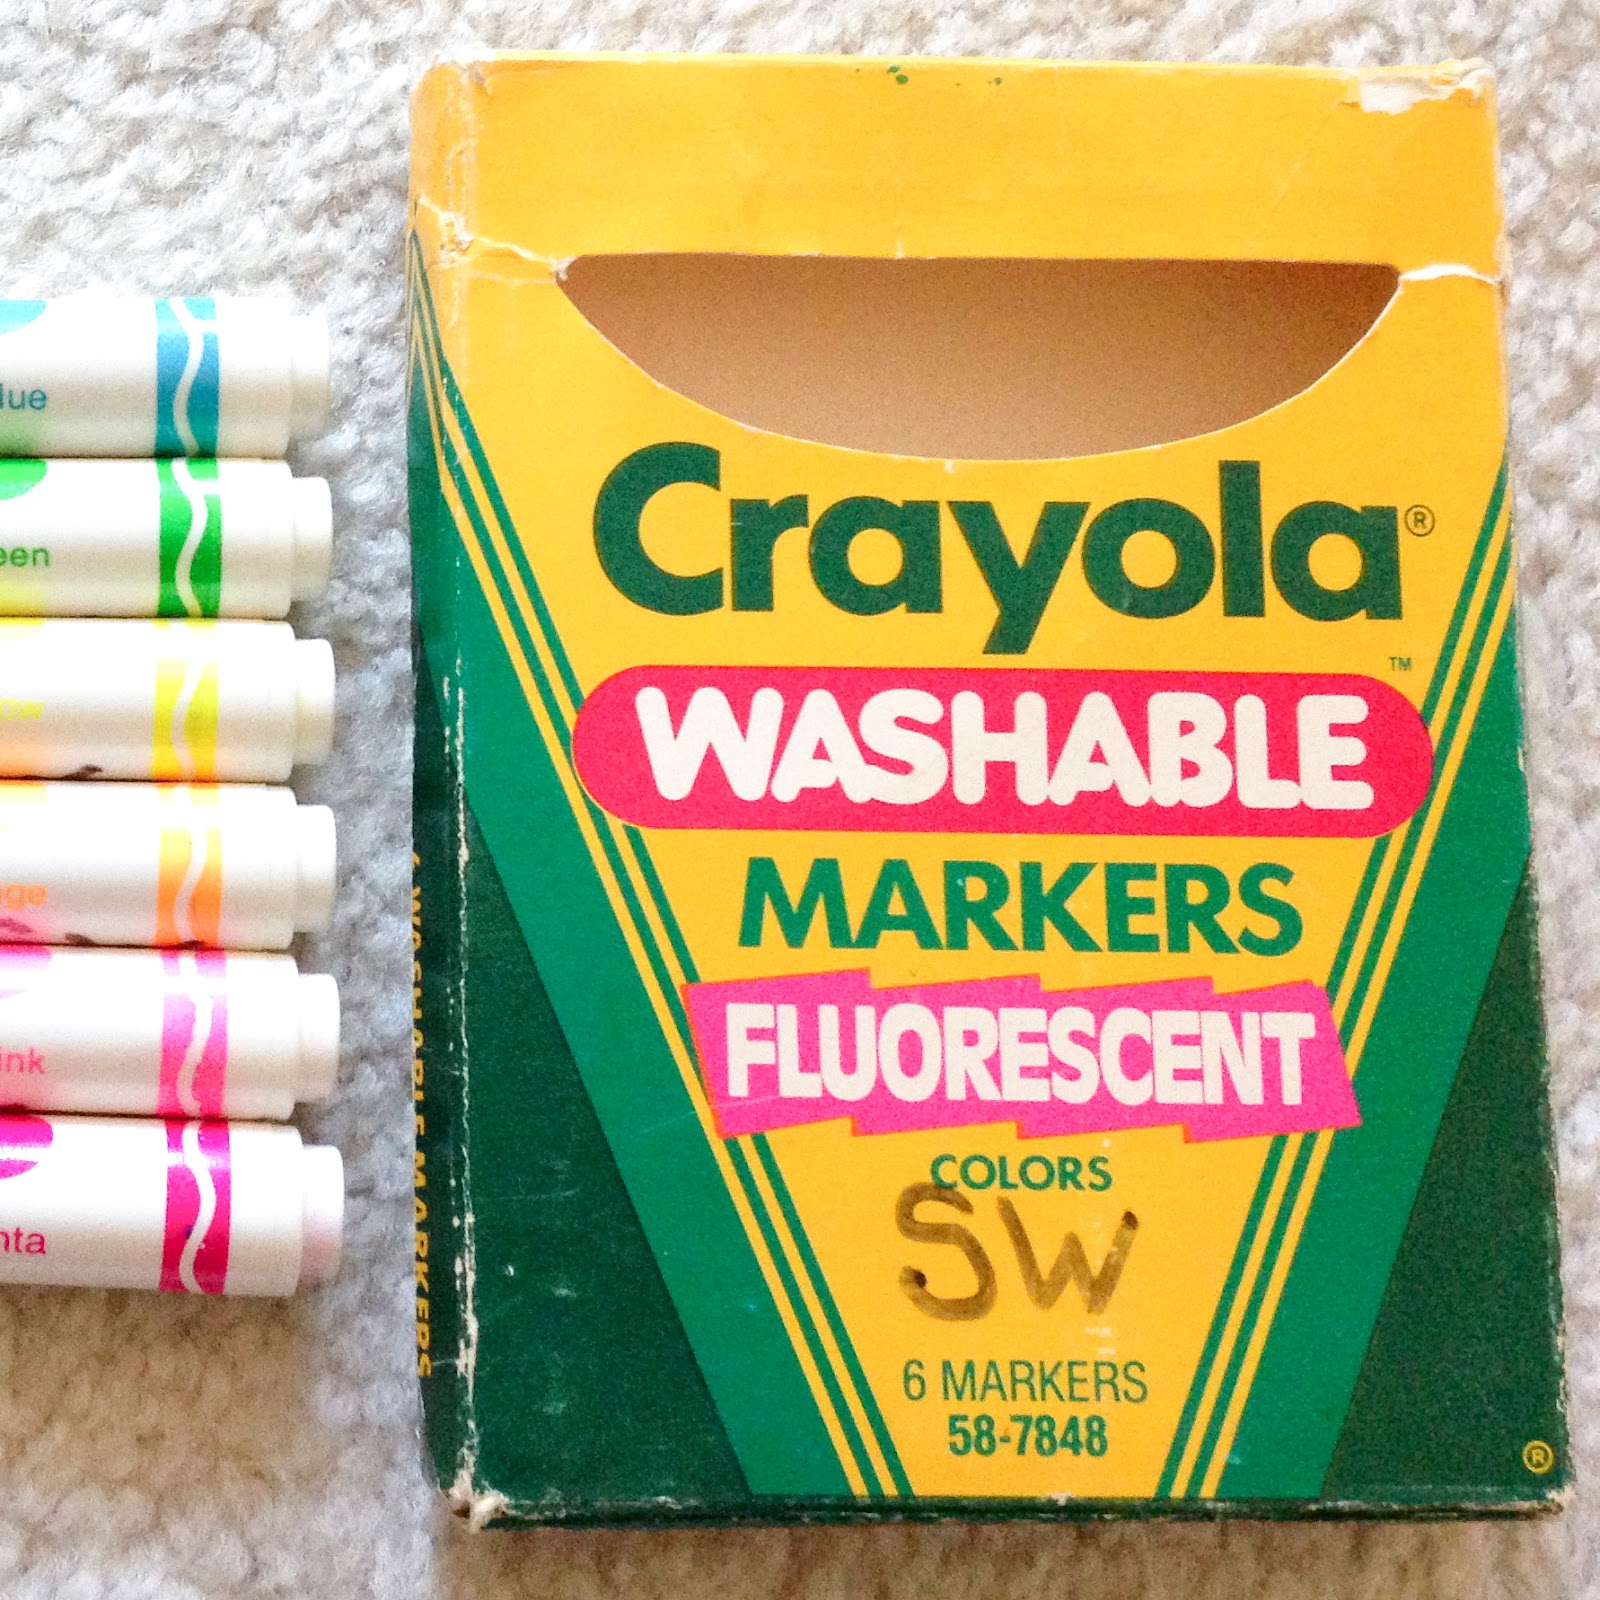 6 Count Crayola Fluorescent Markers What S Inside The Box Jenny S Crayon Collection